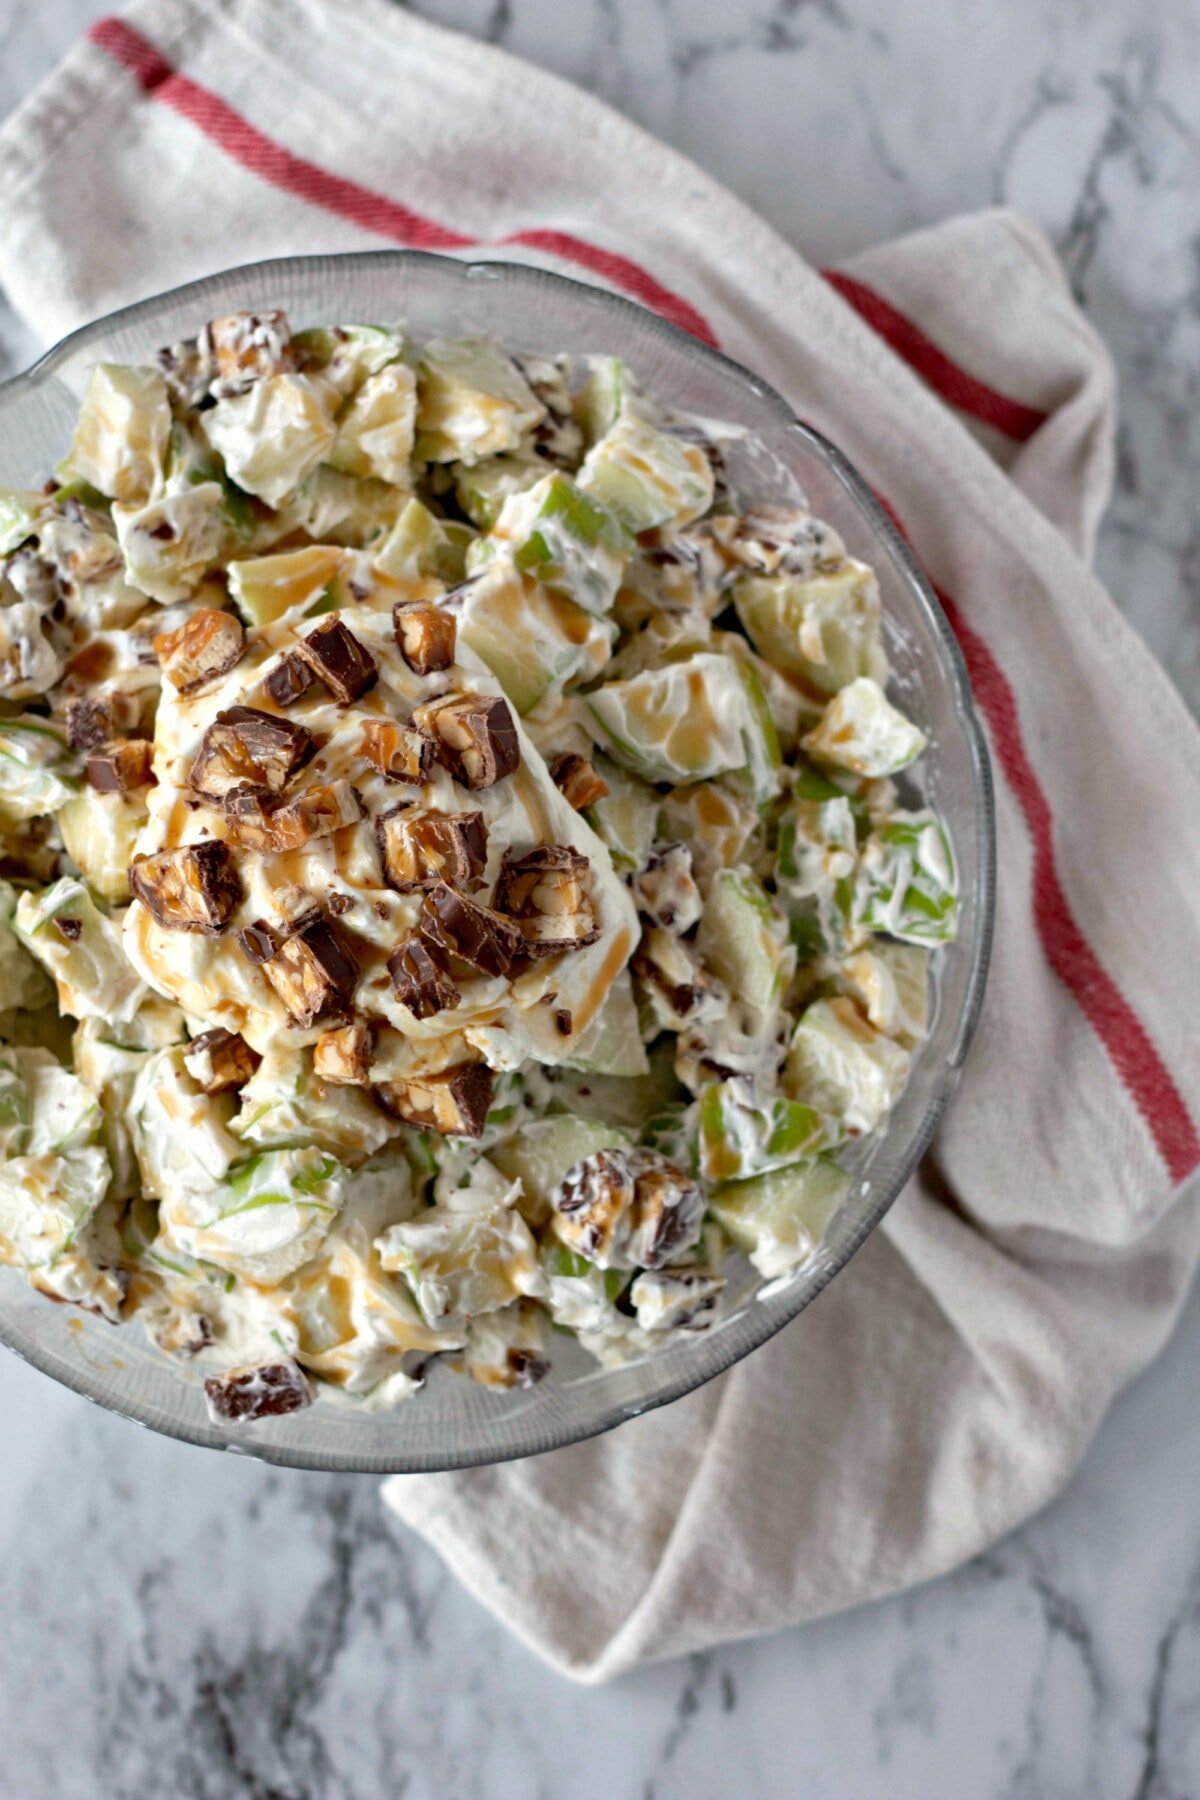 Snickers apple salad in a bowl